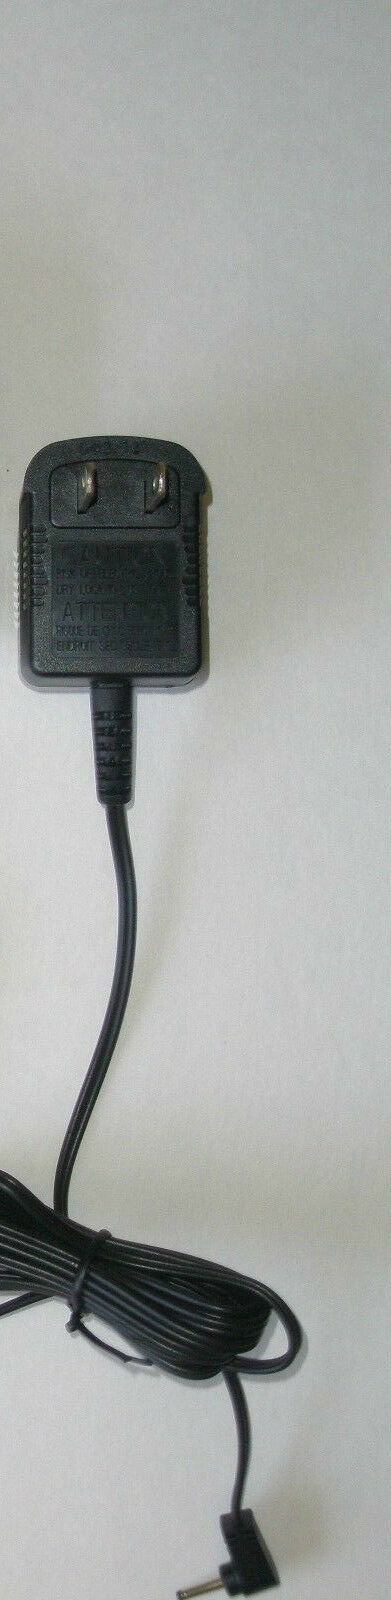 Primary image for 6v ac 6volt adapter cord =AT T remote charging base CL83463 charger cradle stand